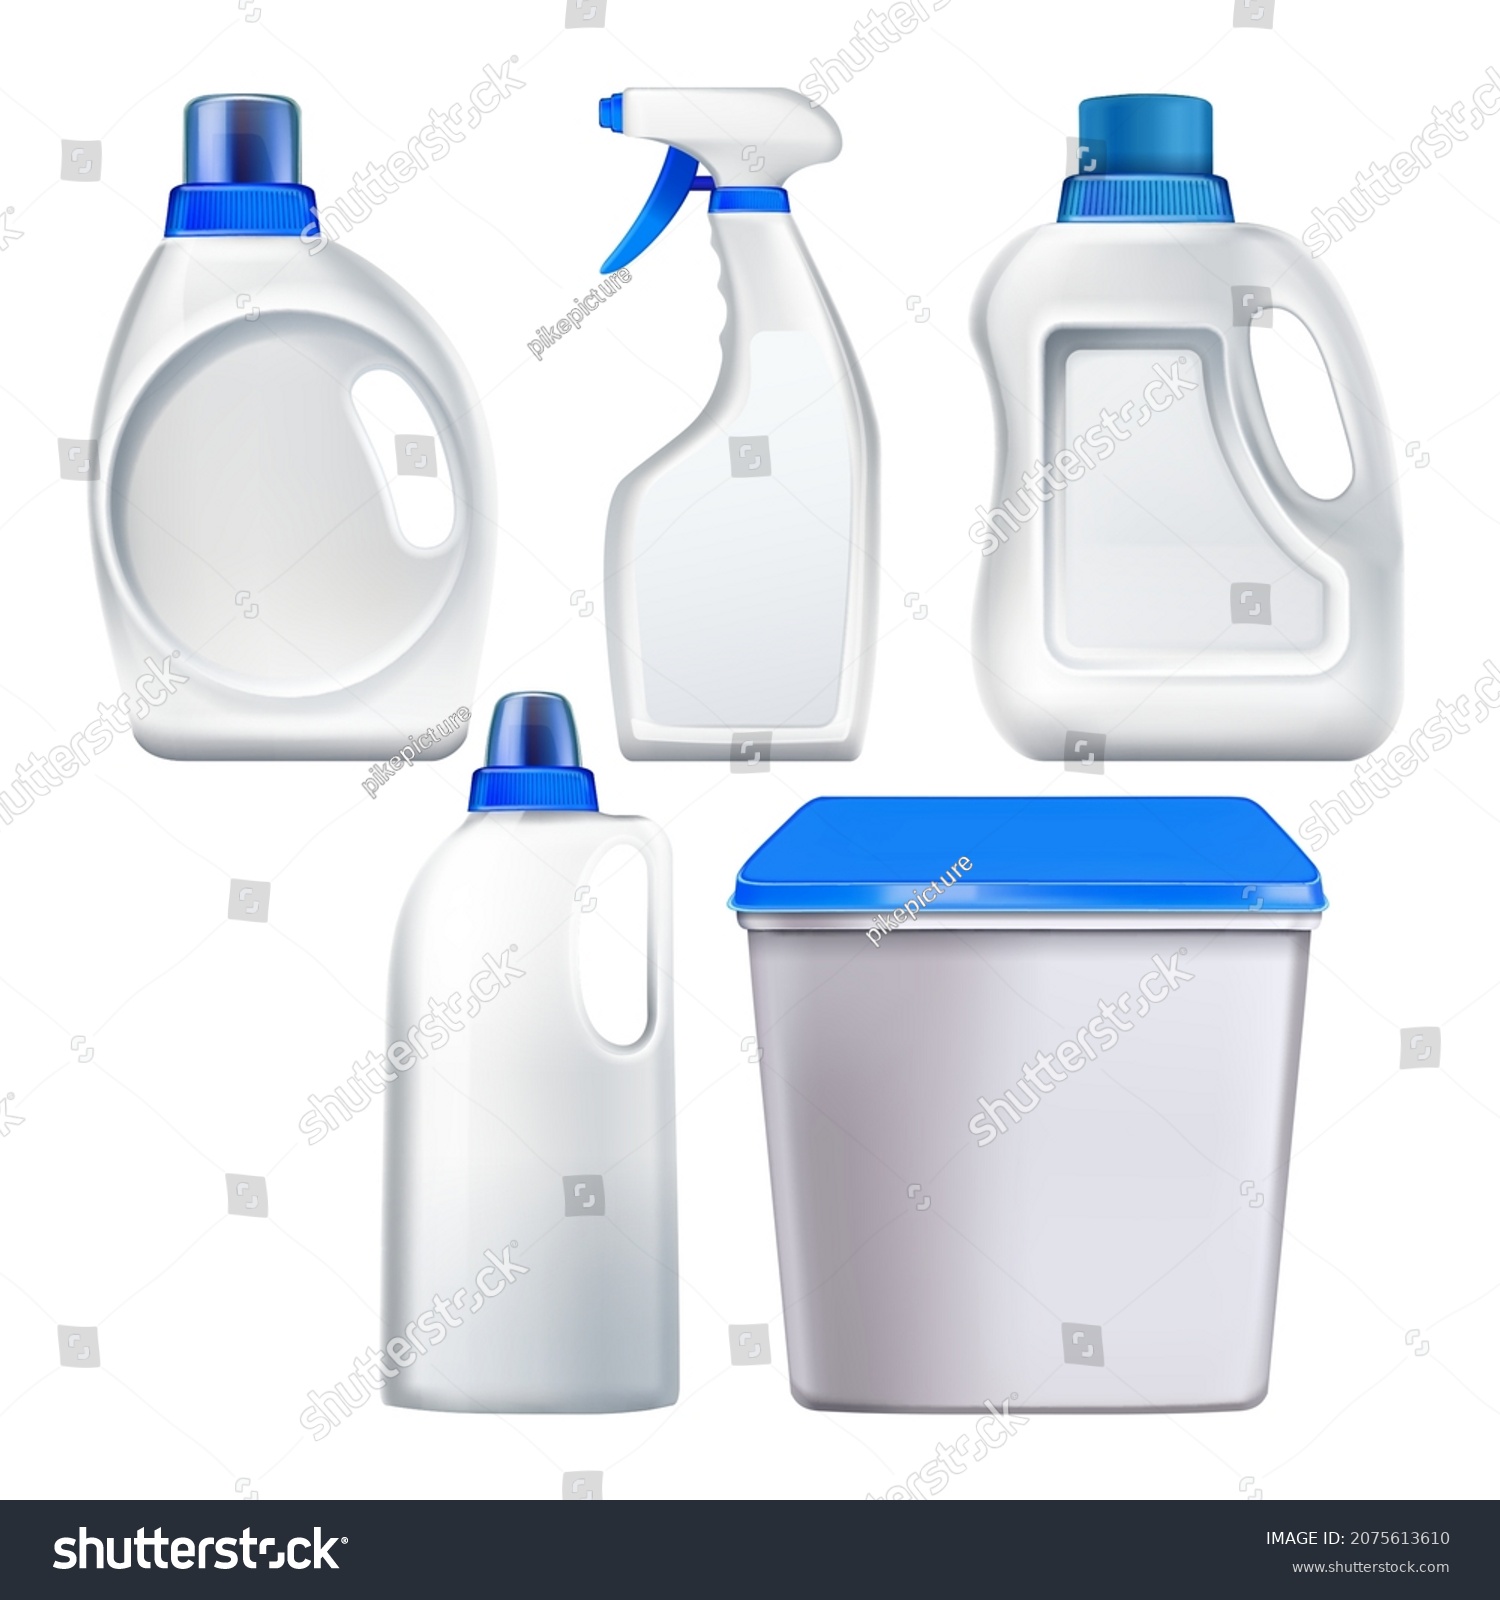 SVG of detergent bottle plastic container set. soap product. household liquid. laundry cleaner. white package mockup. toilet bleach blank. 3d realistic vector svg